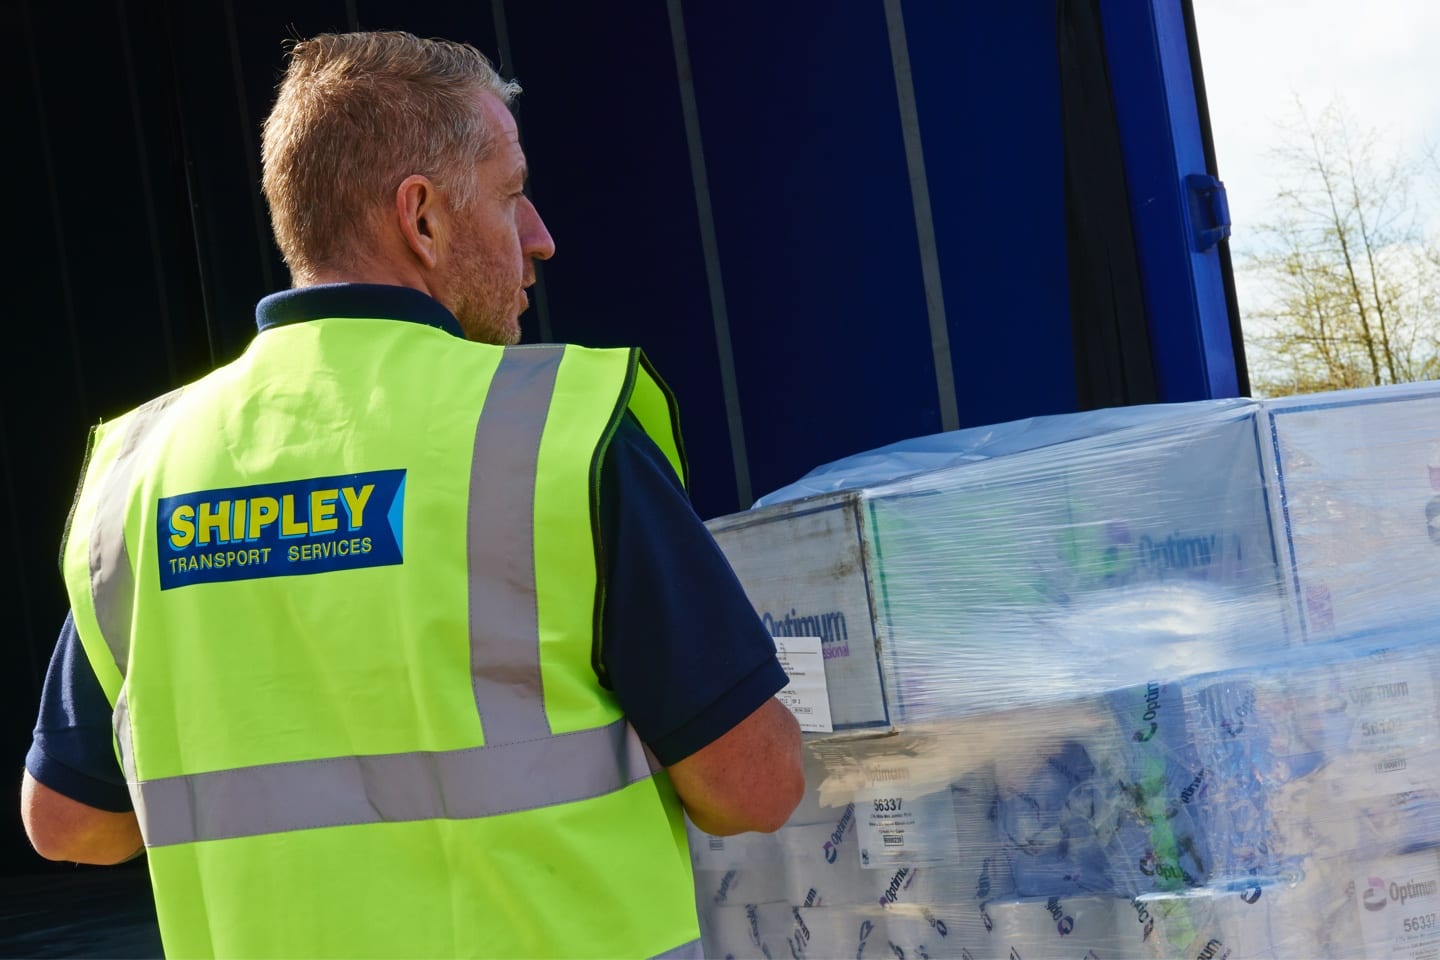 Pallet delivery and warehousing